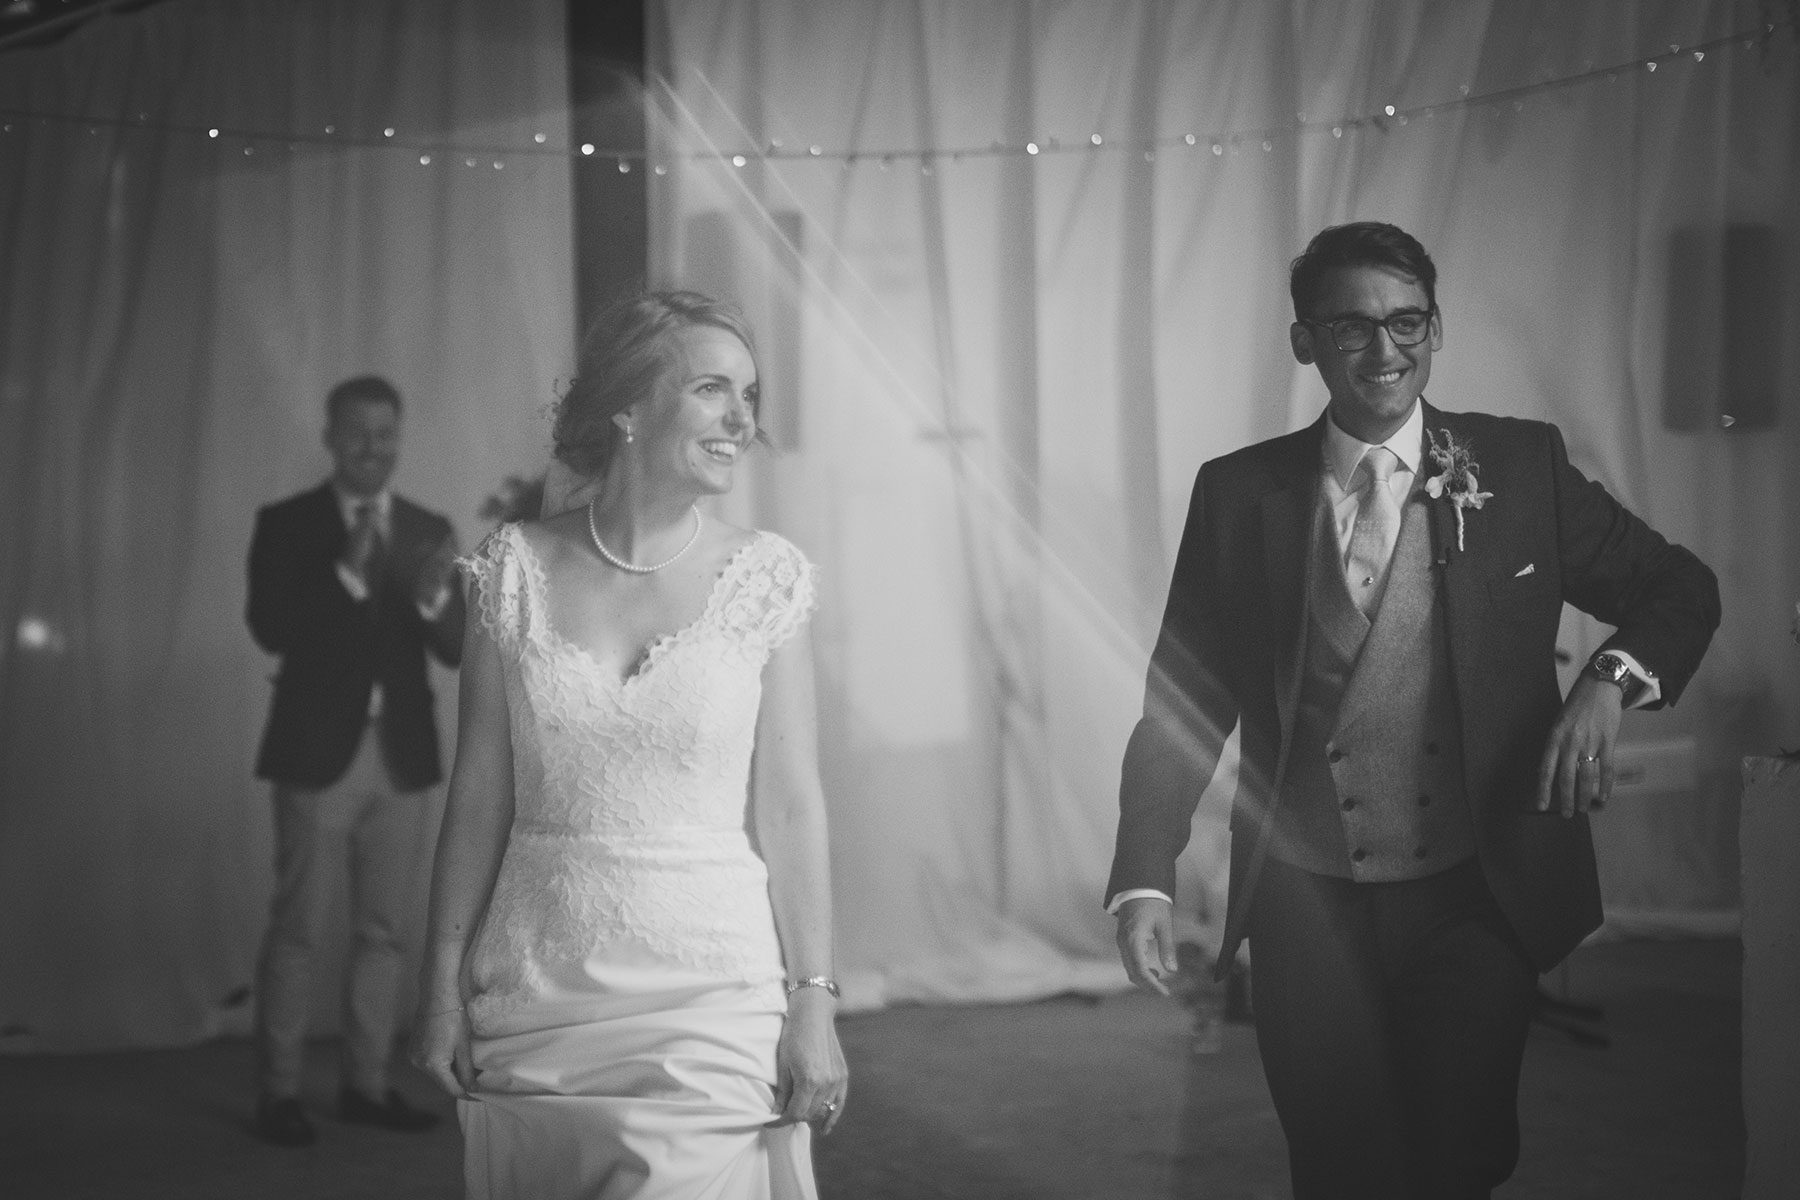 Reportage Wedding Photography in Cheltenham, Gloucestershire & the Cotswolds | Bullit Photography